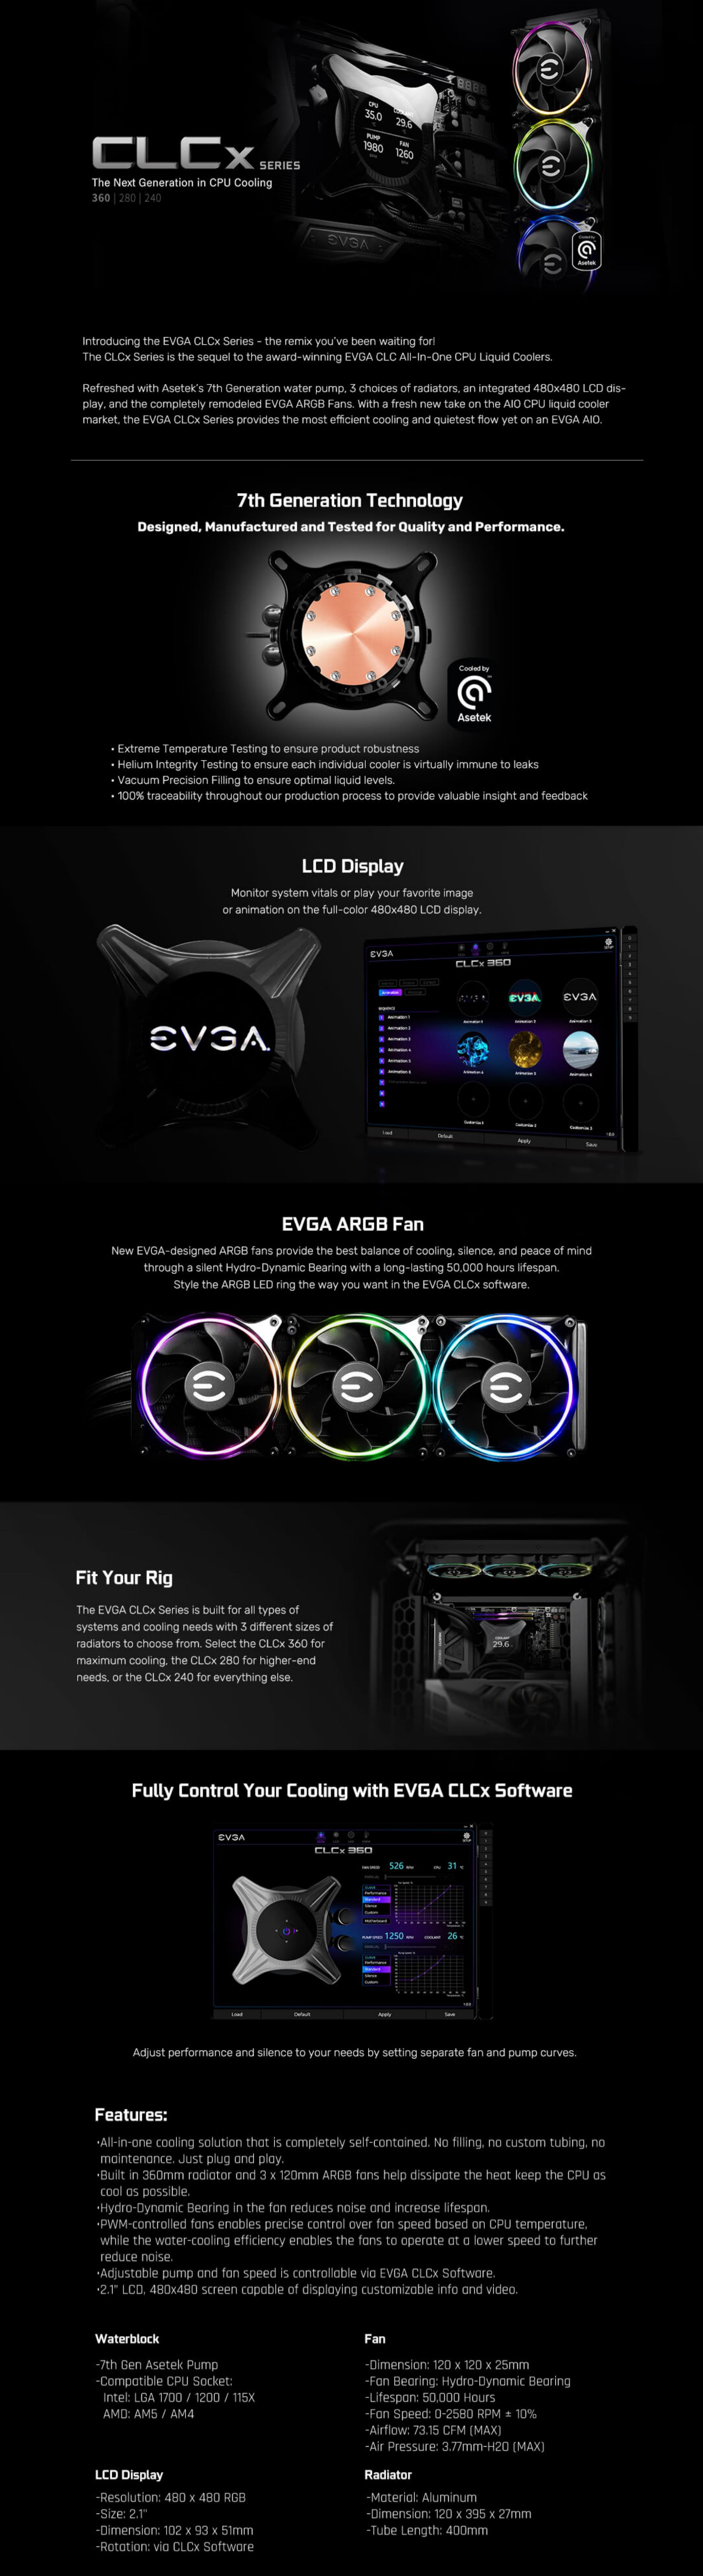 A large marketing image providing additional information about the product EVGA CLCx 360mm AIO LCD Liquid CPU Cooler - Additional alt info not provided